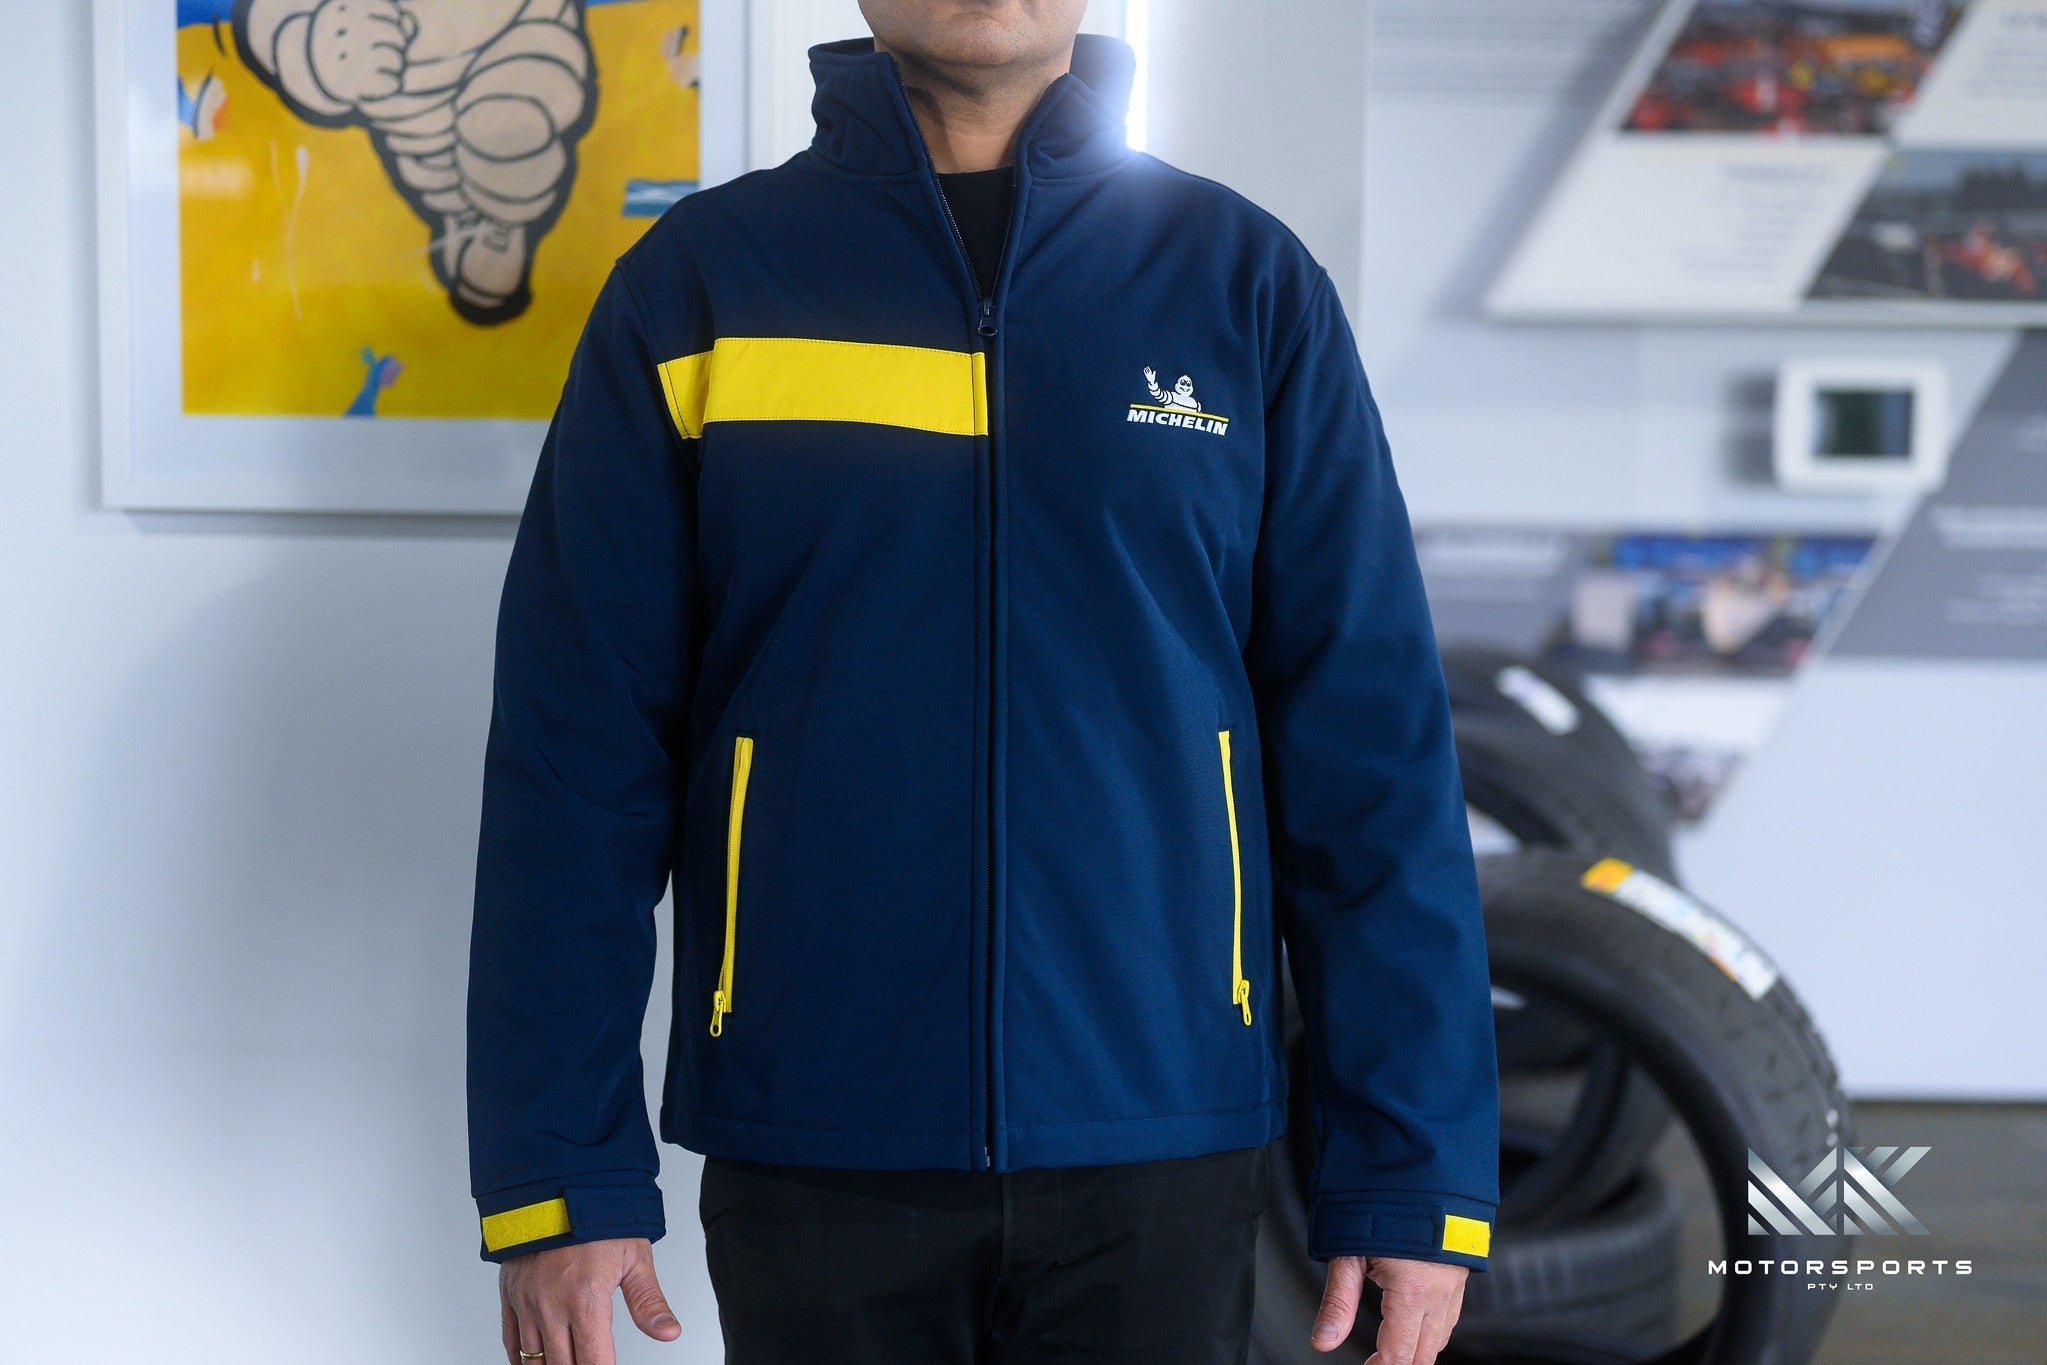 Michelin Motion Softshell Jacket - Premium Merchandise from Merch - From just $99.00! Shop now at MK MOTORSPORTS